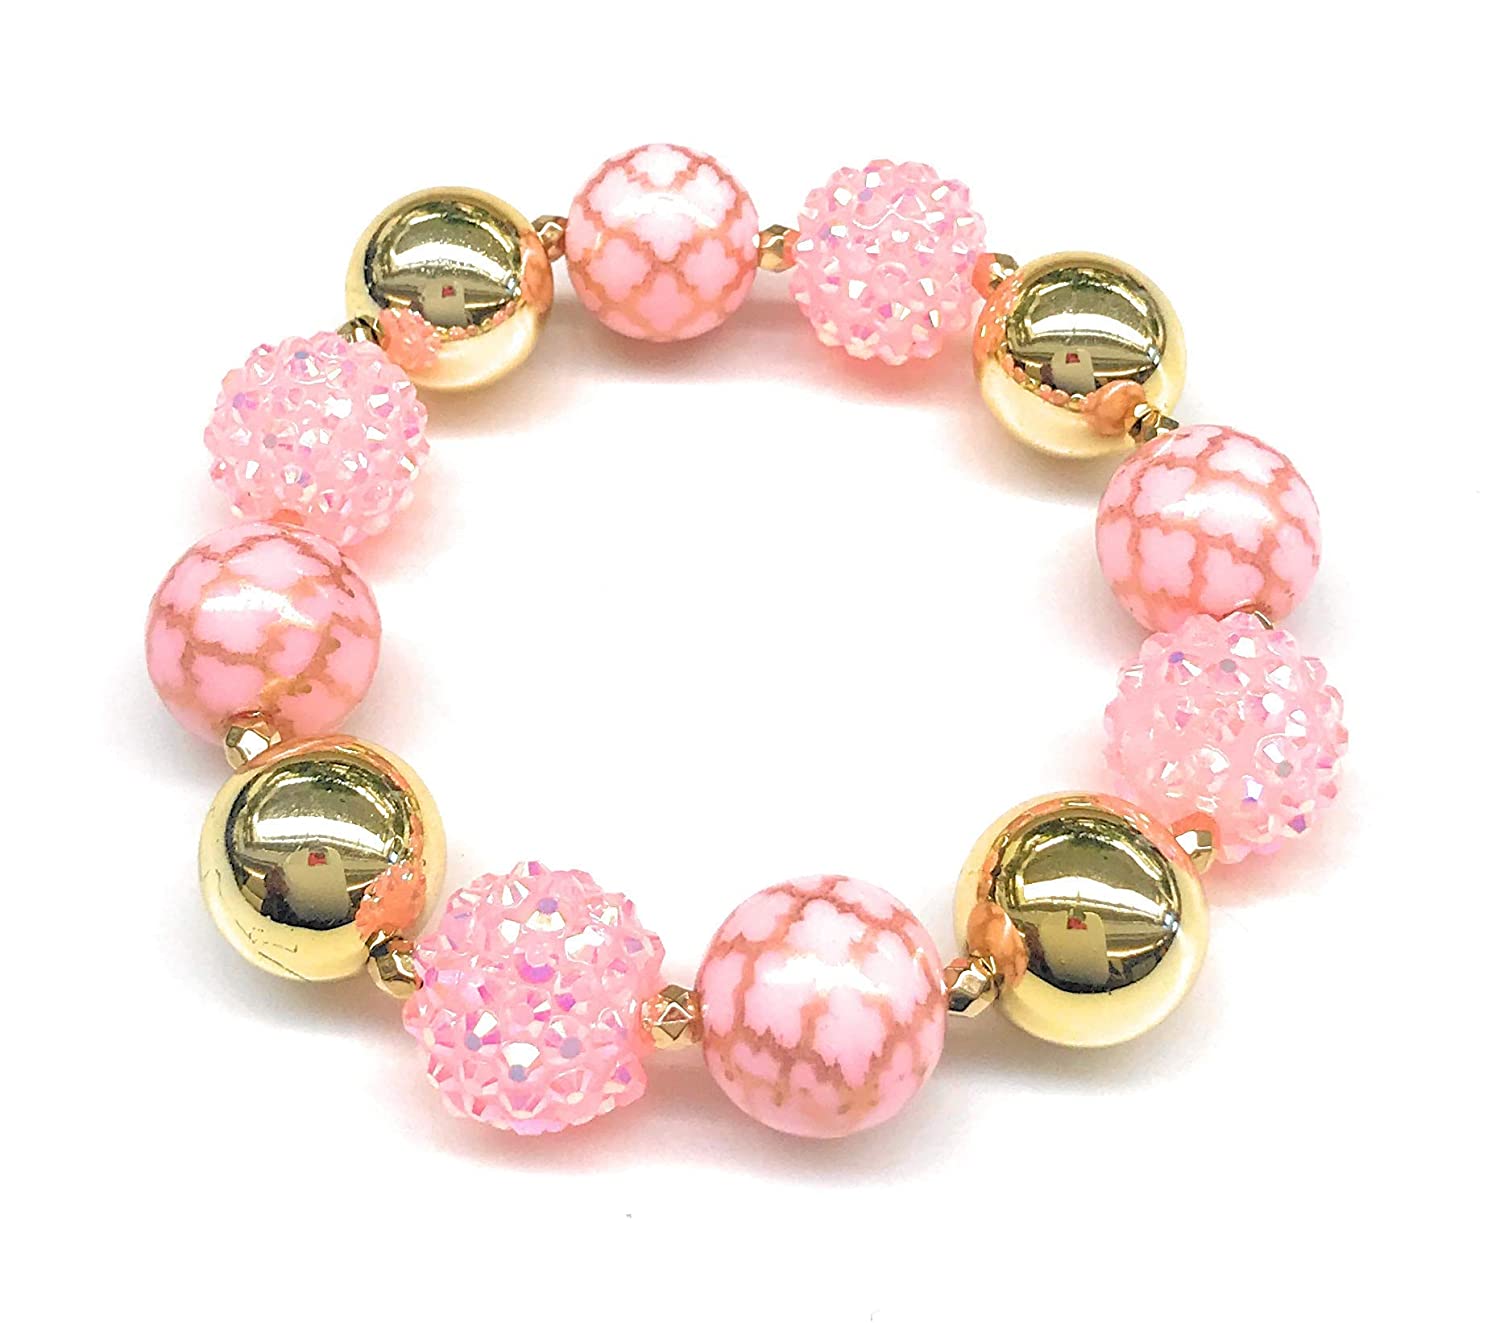 Pink and Gold Beaded Stretch Bracelet from Scott D Jewelry Designs